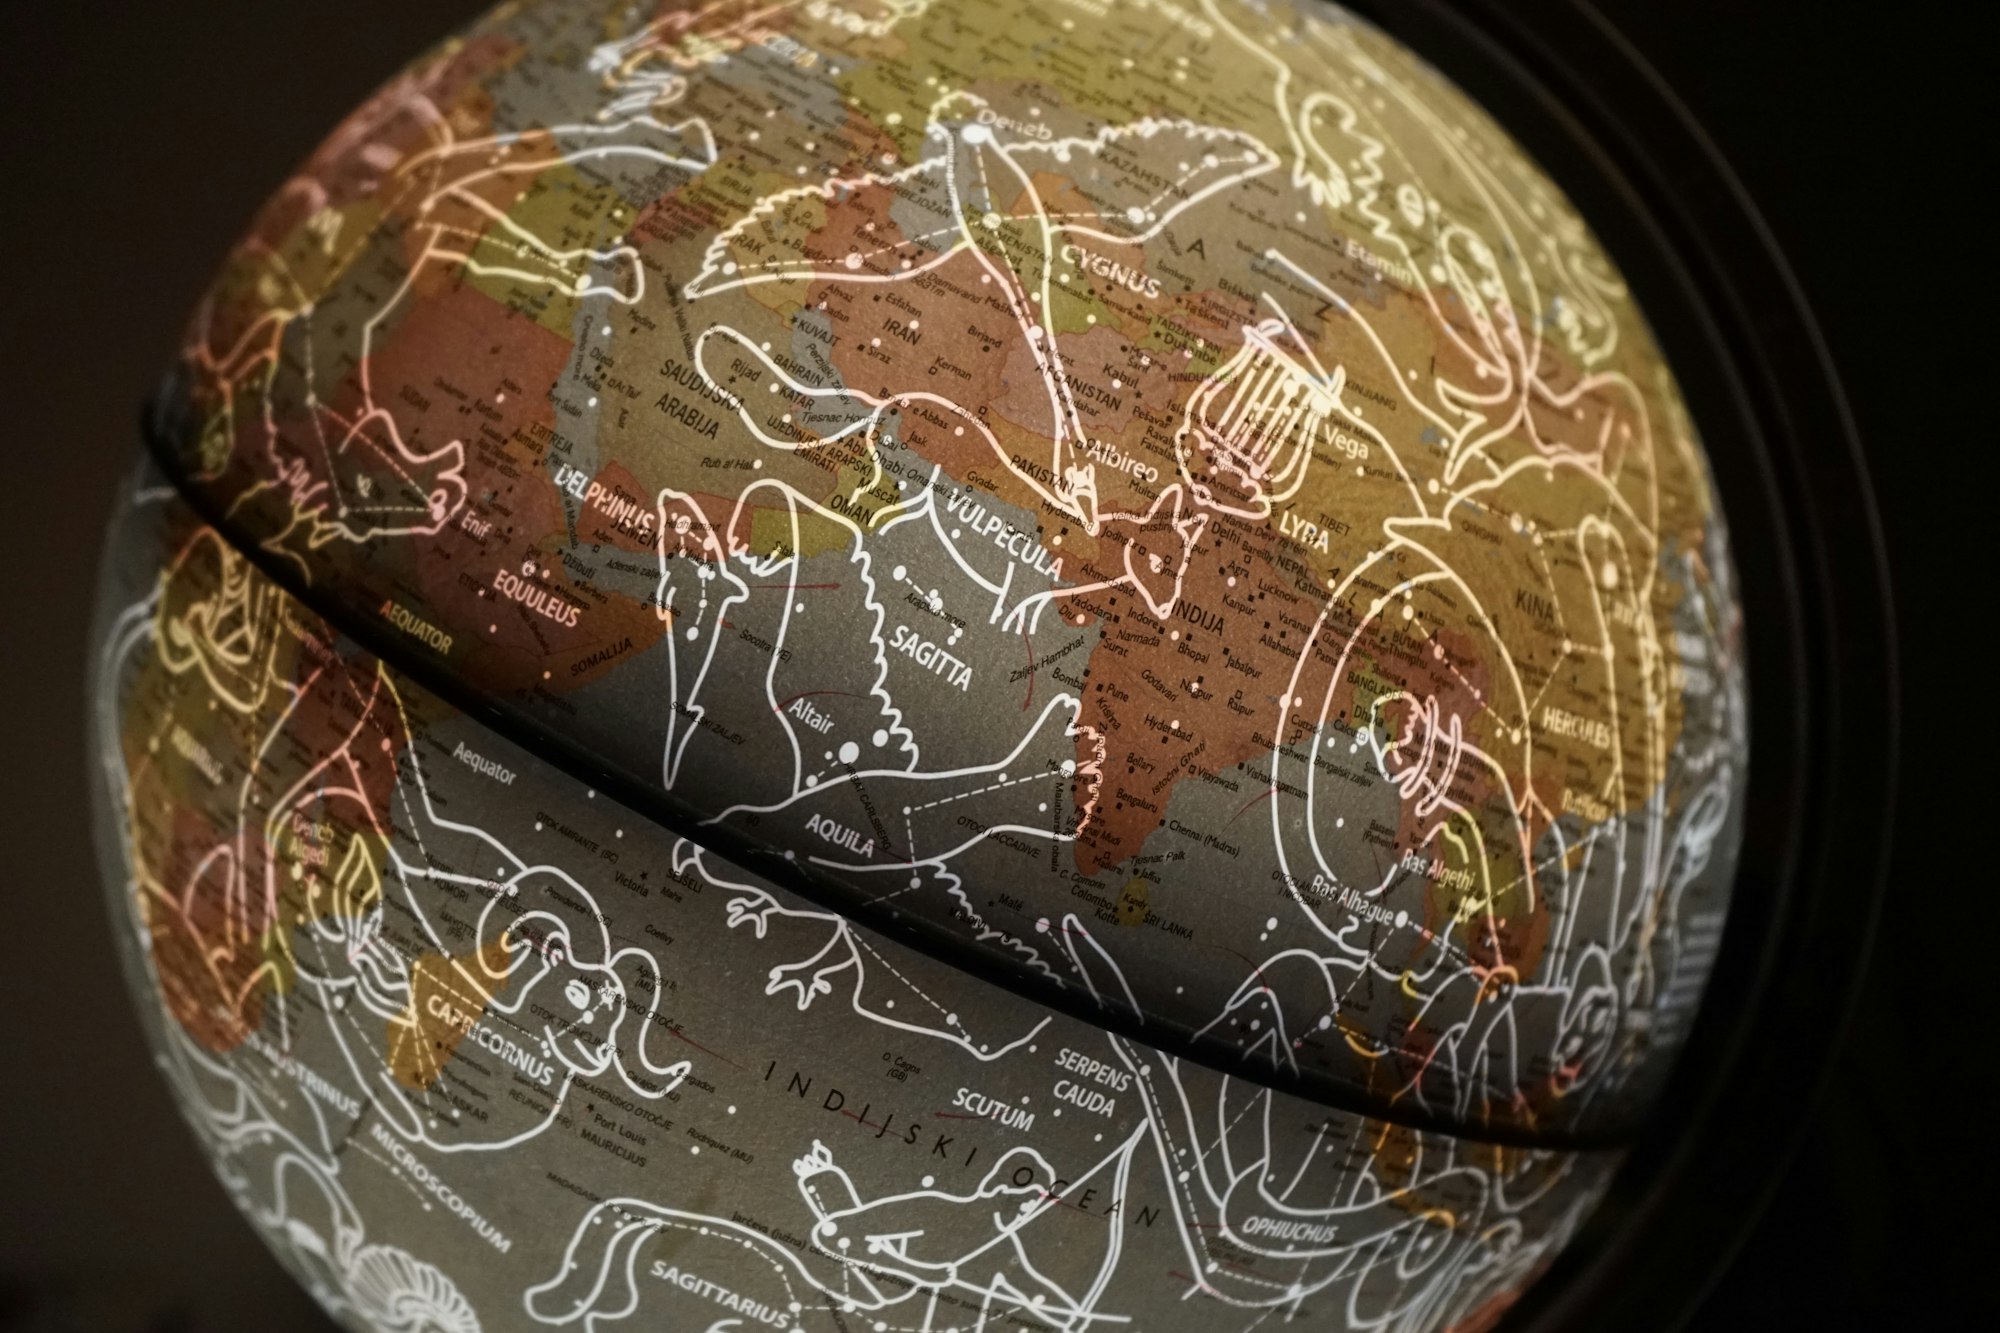 brown and white printed globe with constellations